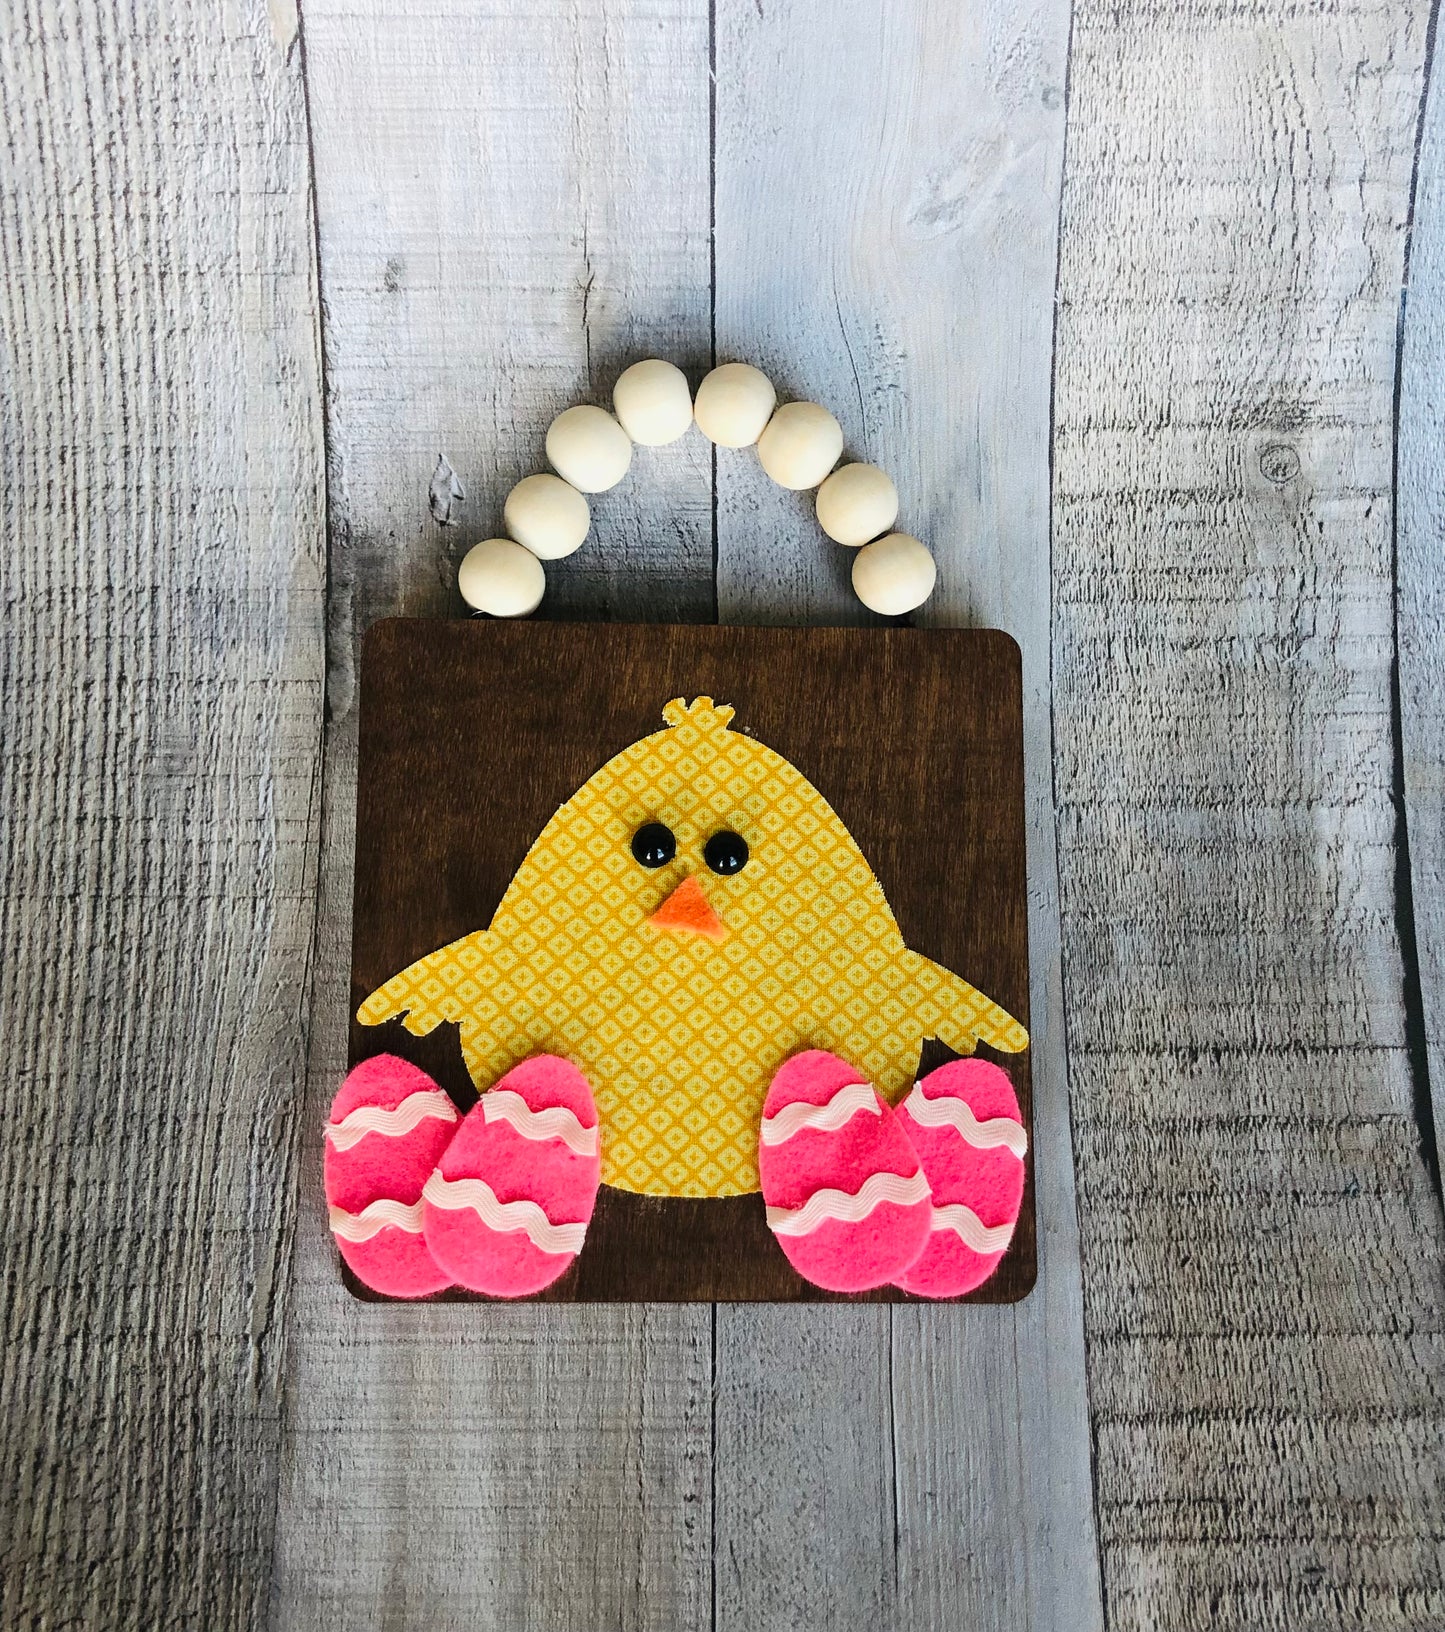 This is an Easter craft of a chick with Easter eggs on a wooden plaque with a wood bead handle.